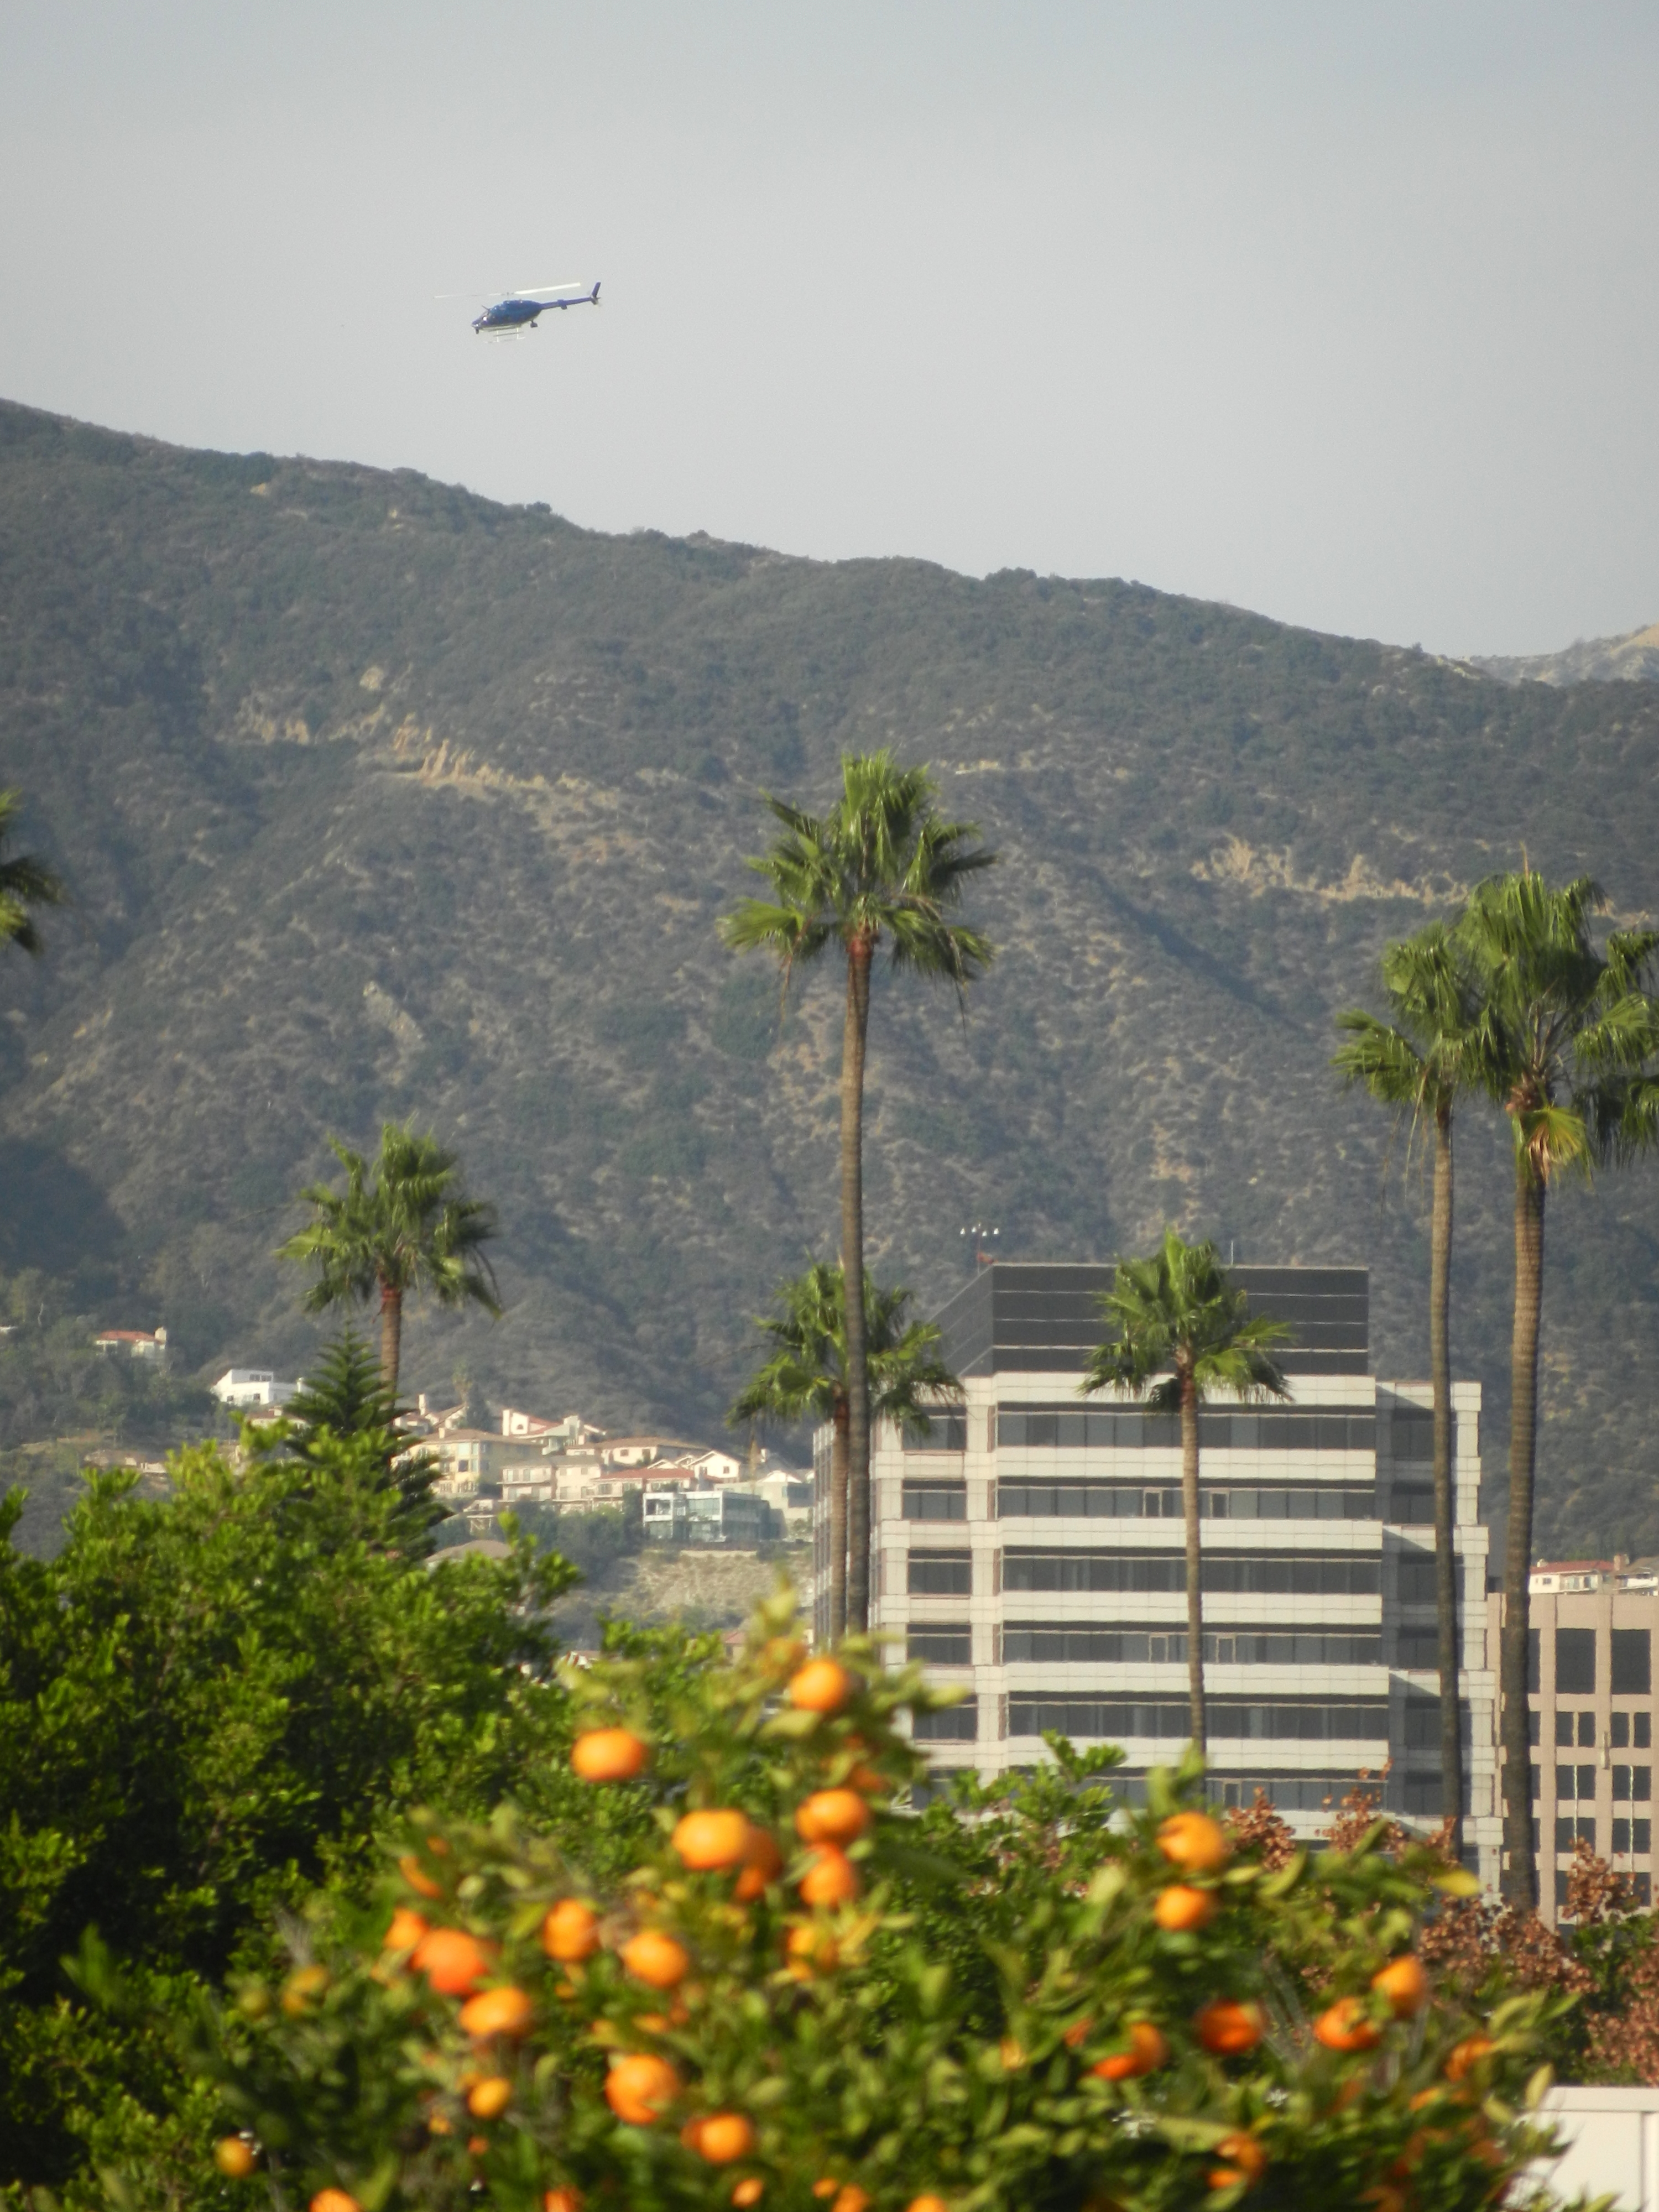 Police Helicopter Over Downtown Glendale